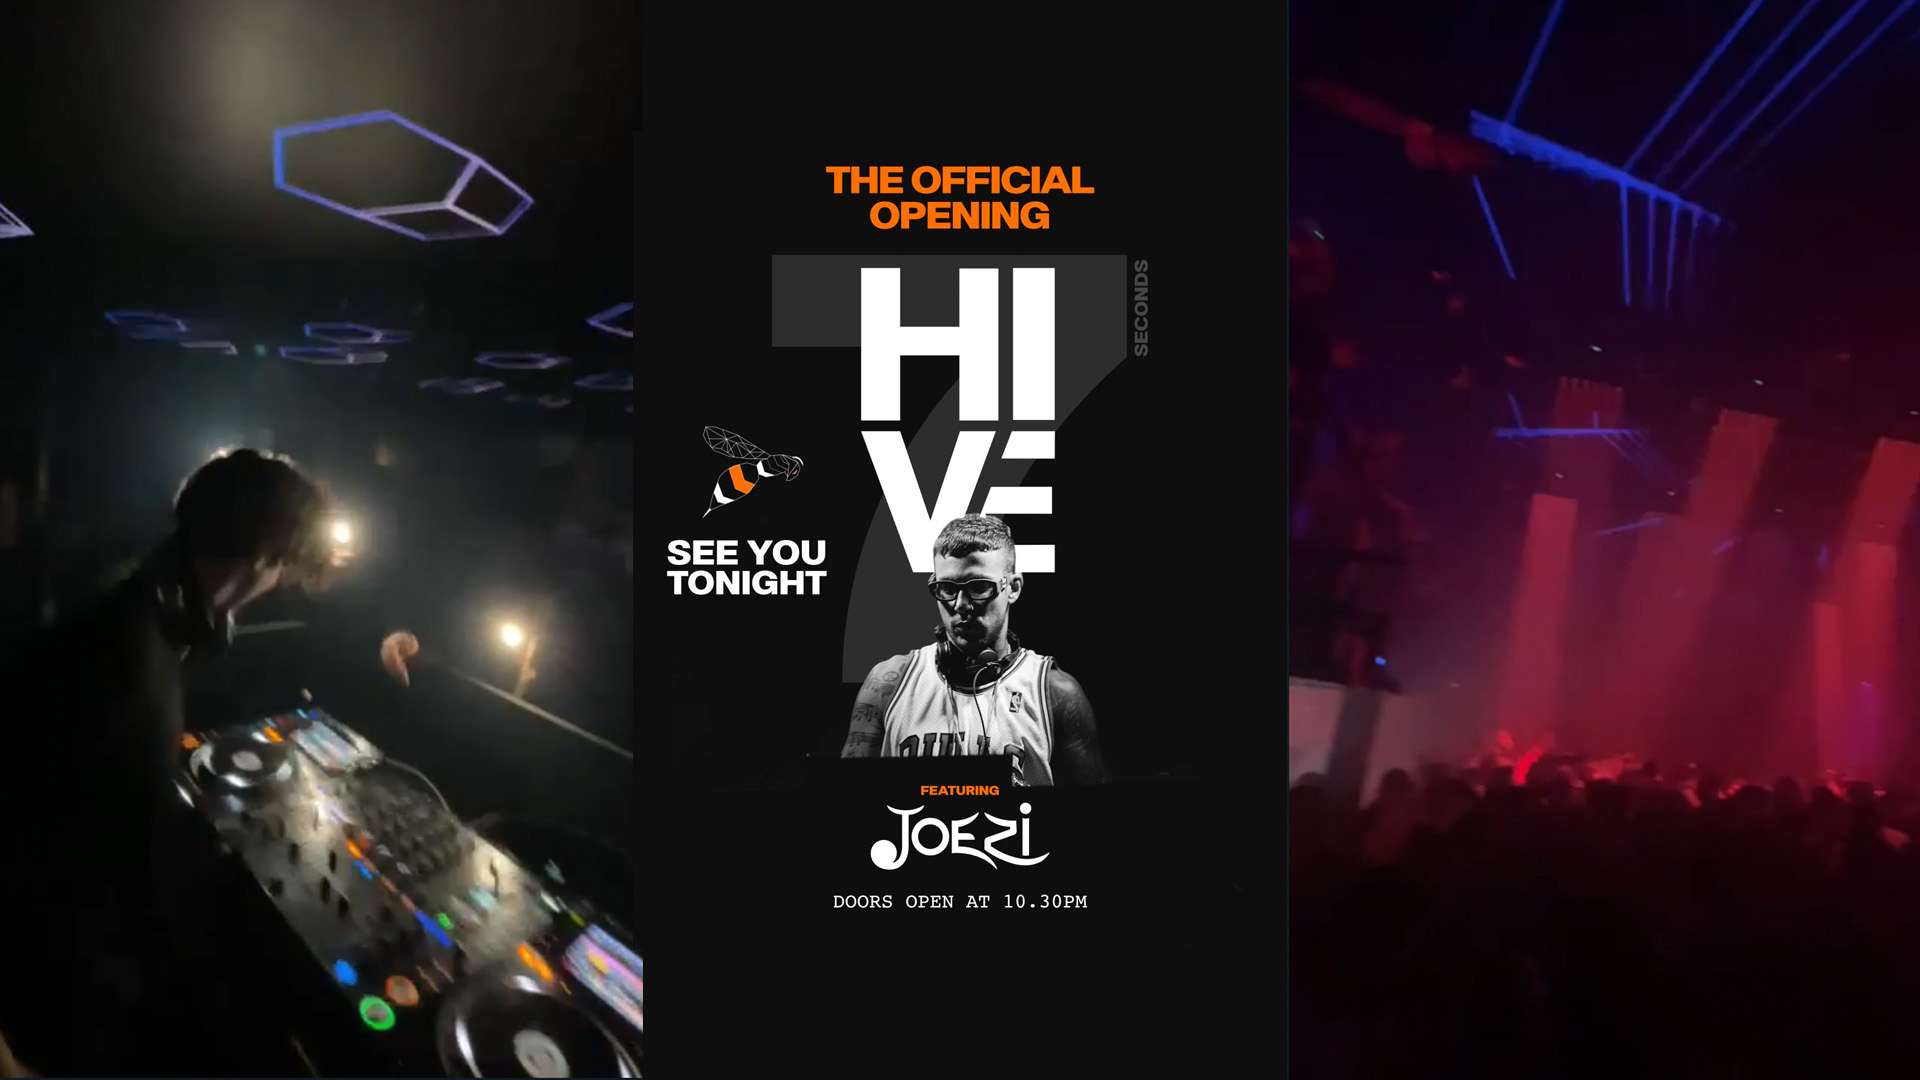 HIVE Club Welcomes Partygoers for Official Opening with '7 Seconds' DJ Joezi